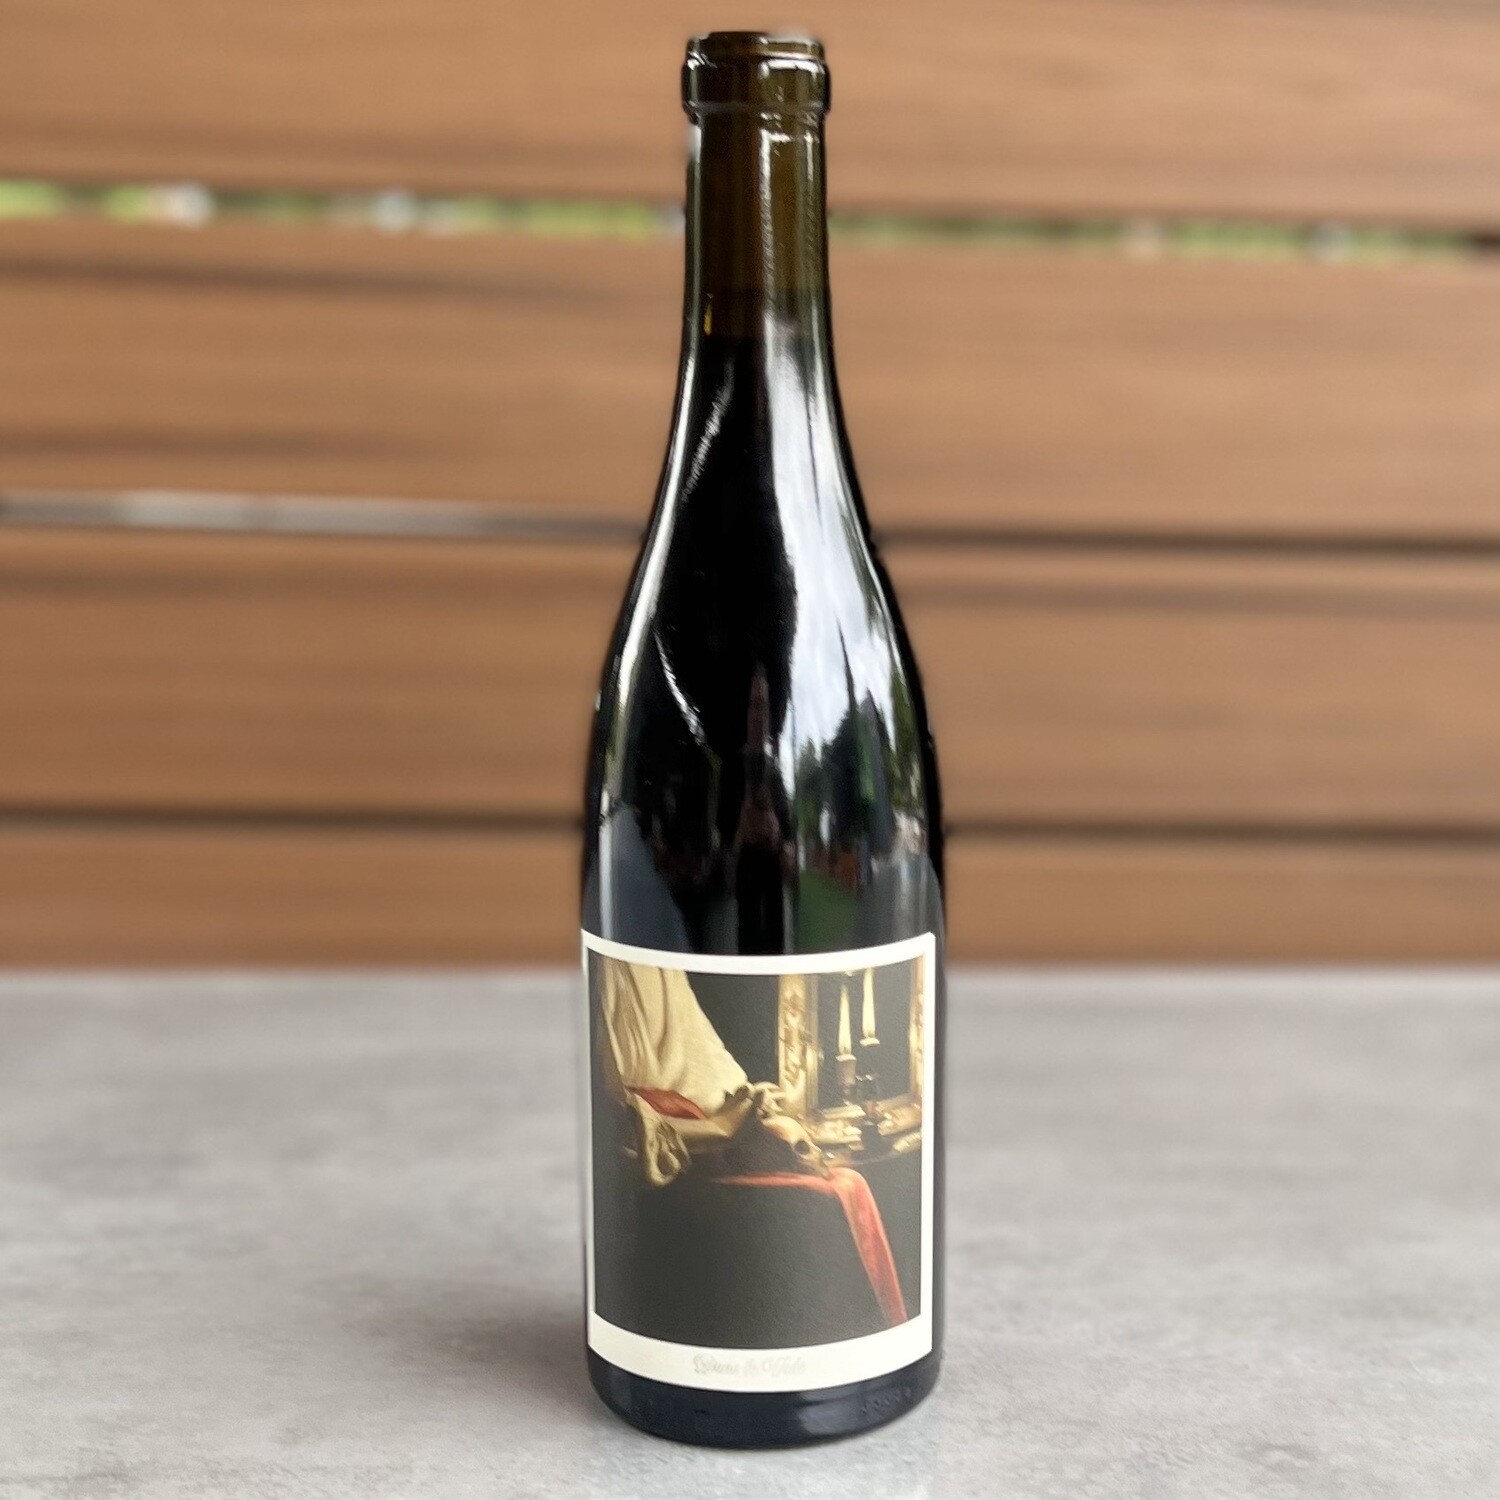 Jolie Laide Red Blend '21 (750ml)